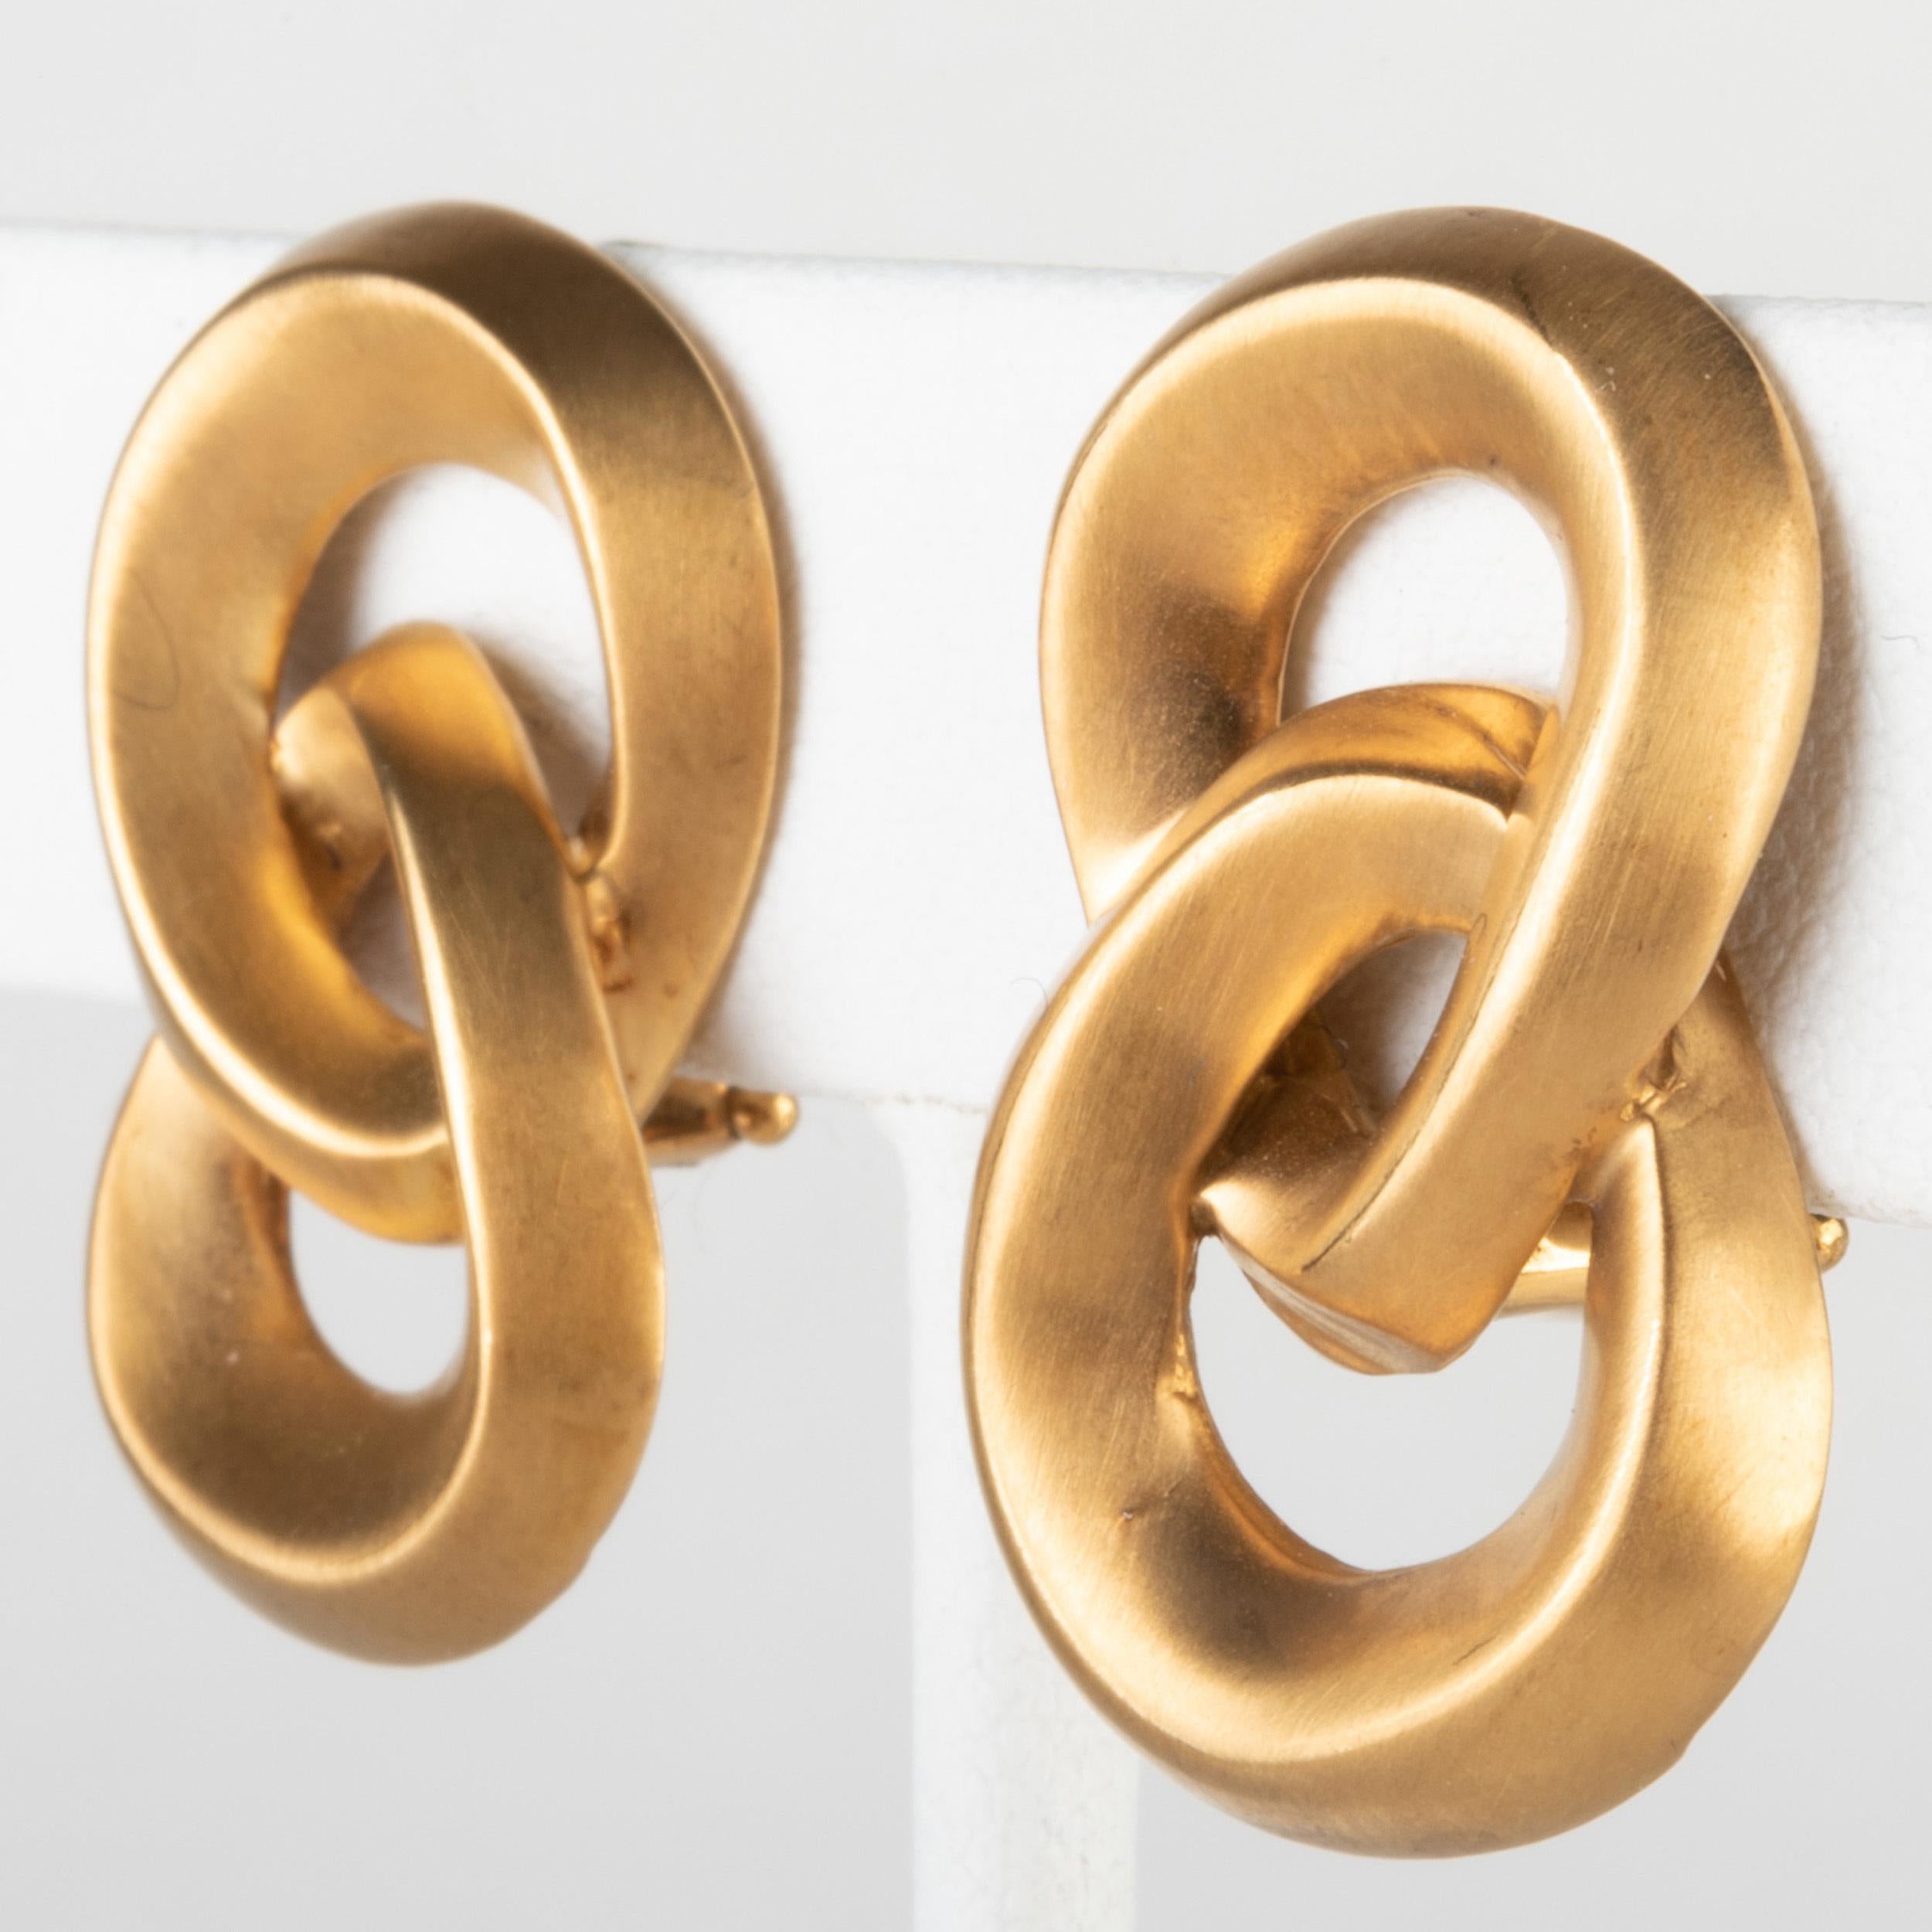 A simple and elegant pair of 18k yellow brushed gold earrings by Angela Cummings.

The clip earrings designed as interlocking knots of figure 8 design with omega backs. The gold with a wonderful texture and tone.

Chic, simple, and easy to wear. Can